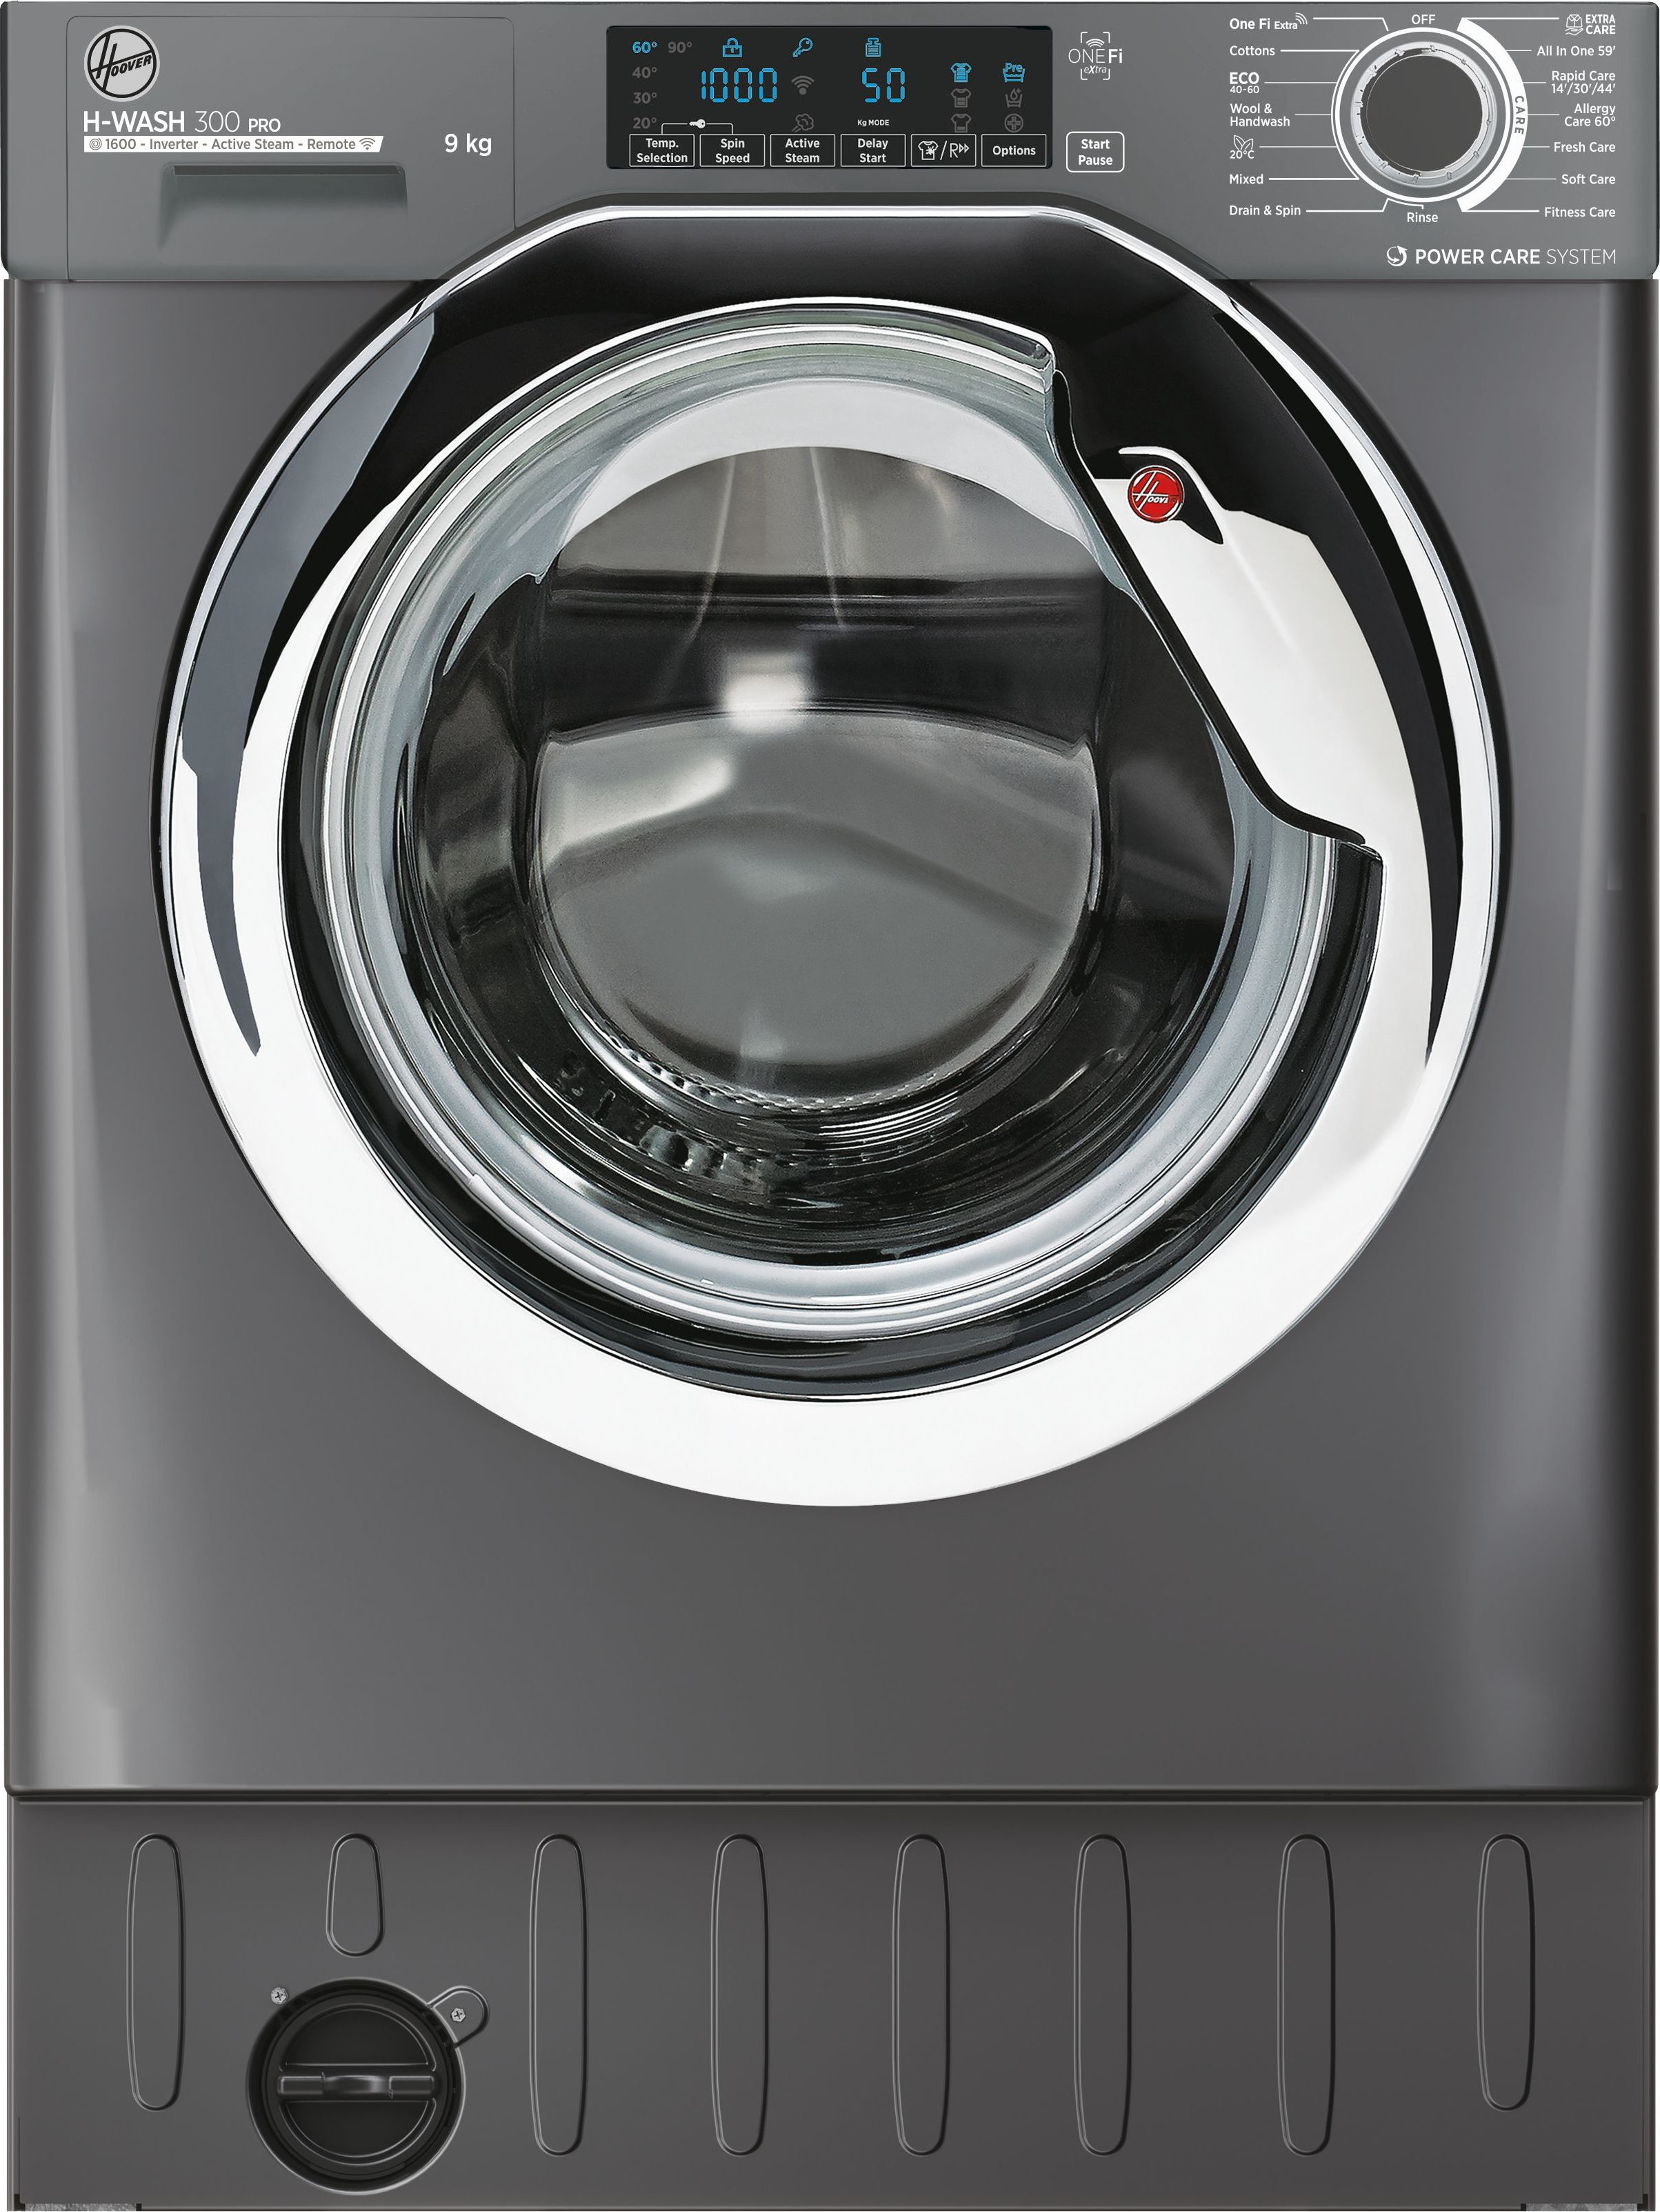 Hoover H-WASH 300 HBWOS69TAMCRE Integrated 9kg Washing Machine with 1600 rpm - Anthracite - A Rated, Black